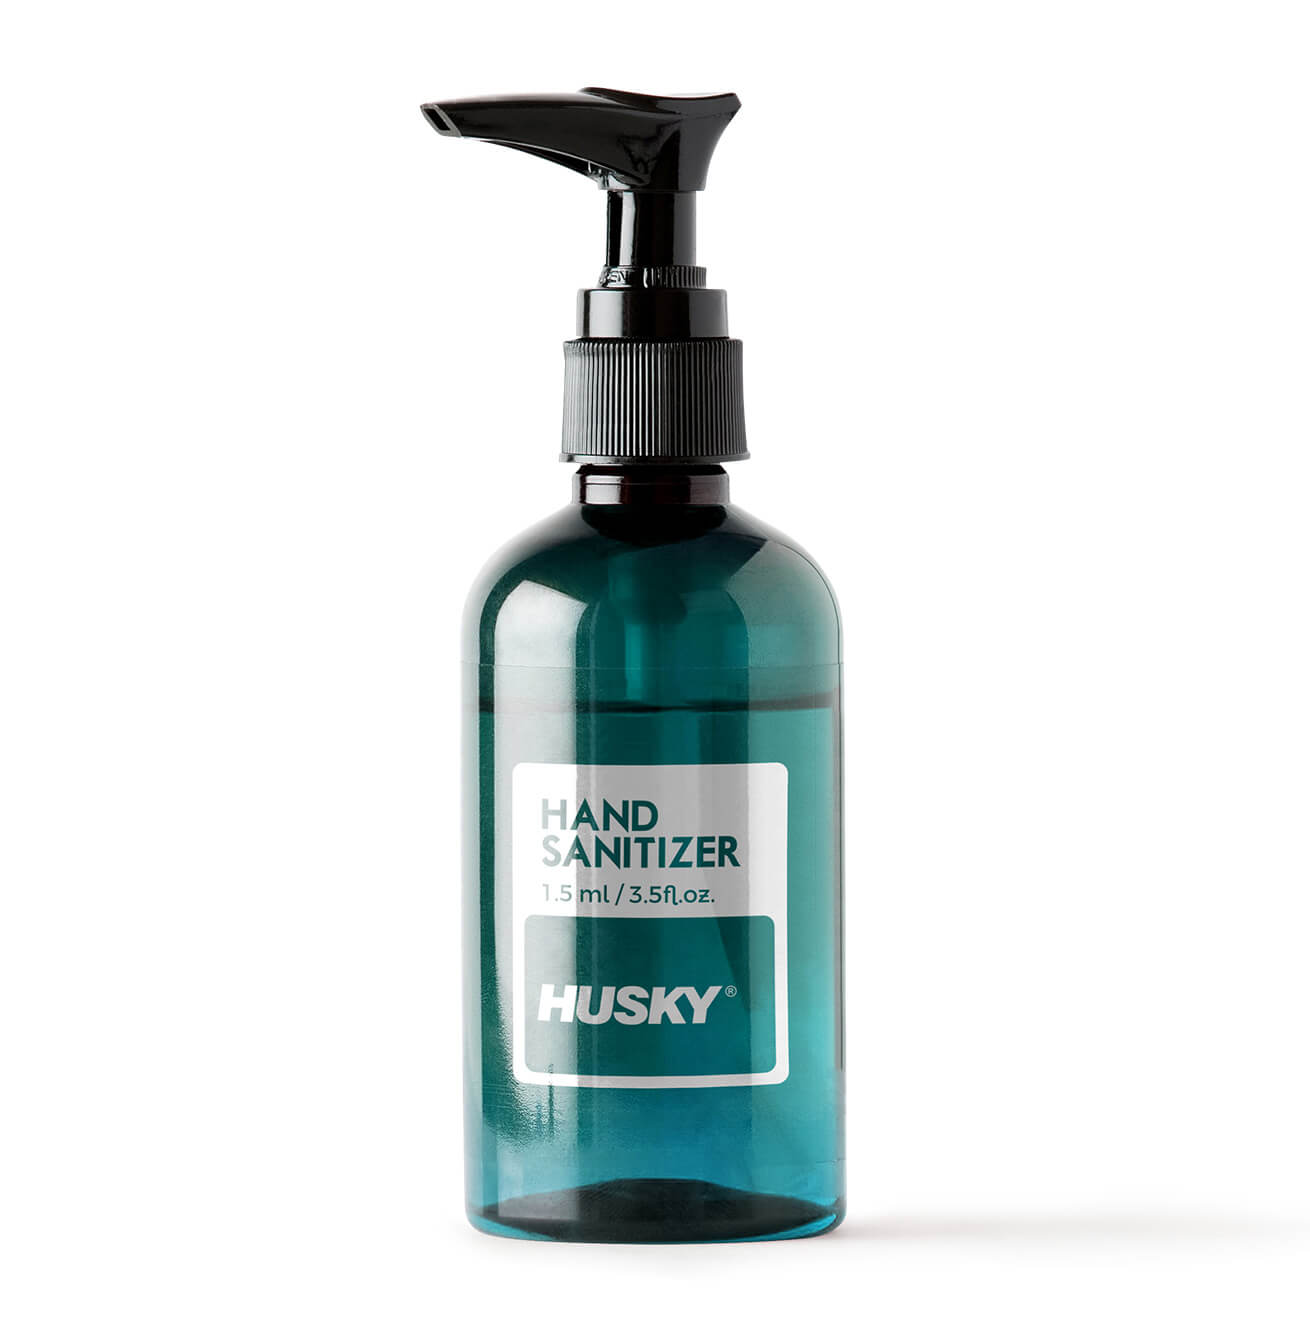 Husky hand sanitizer with rigid hygienic packaging